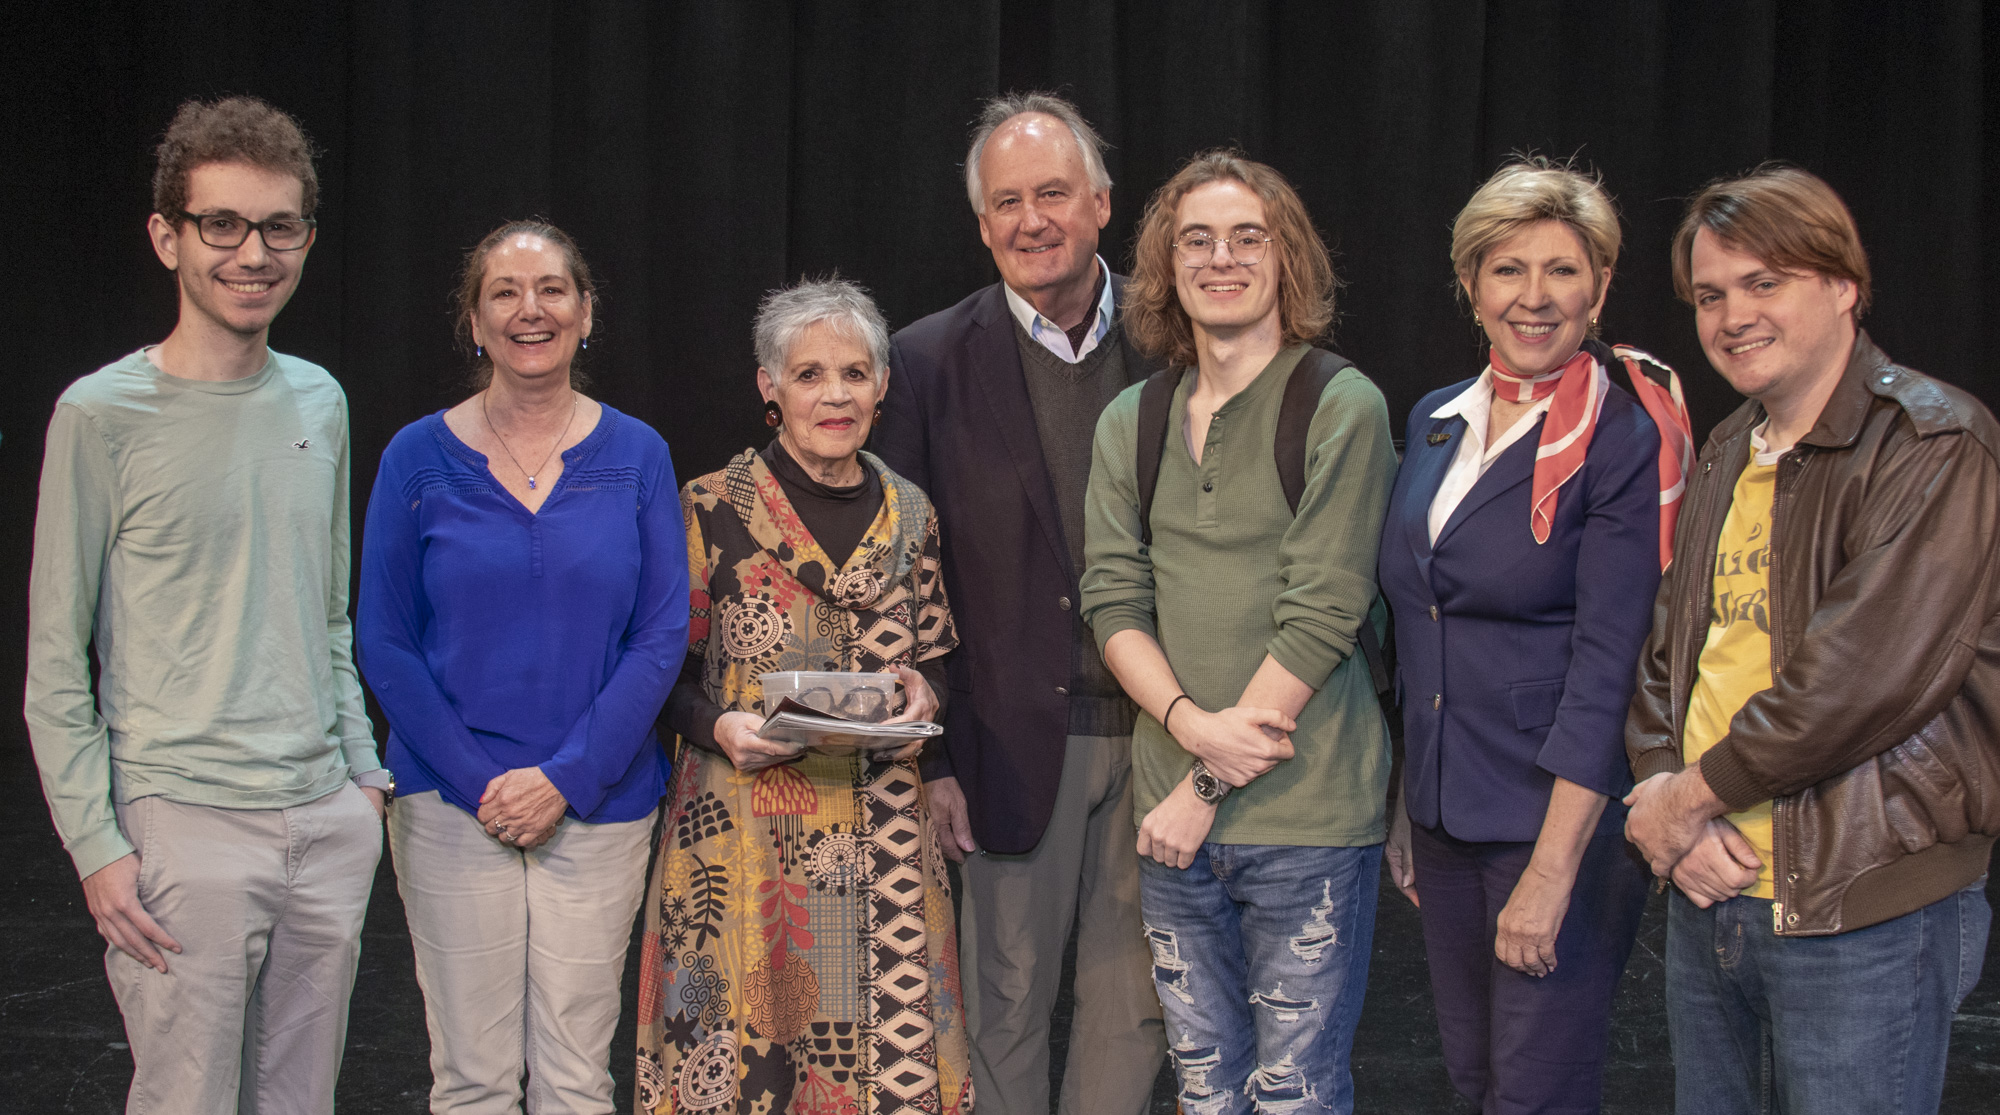 FLYING SOLO WITH IBD—The winning play from the 2021 Student Festival, by former Pine View student Spencer Opal-Levine (at left), was presented as this festival's bonus. The creative team included Tami Vaughan, Elsie Souza, Tom Aposporos, Tom Horton, Aden Russell, and director Ren Pearson.